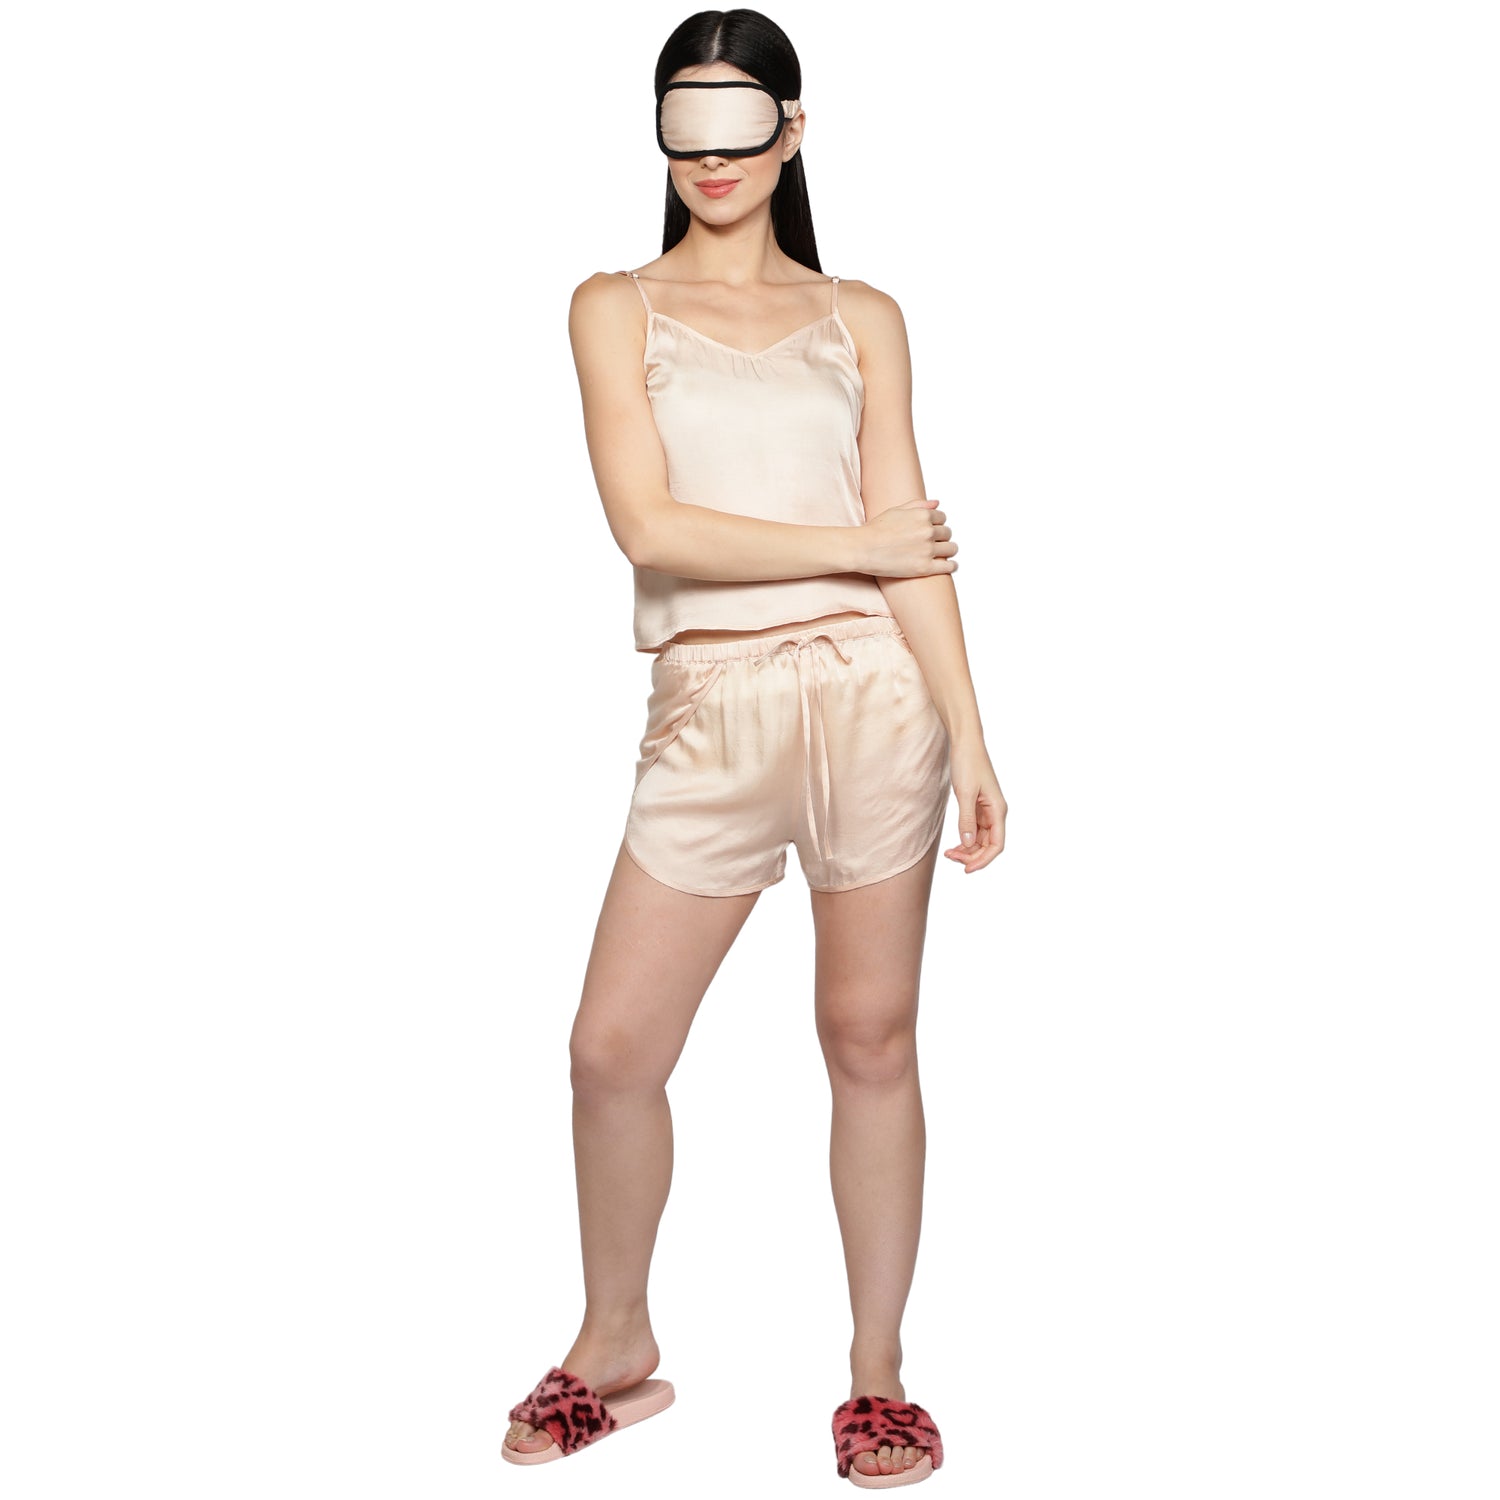 SLAY. Women's Nude Color Camisole & Short Coord Set with matching Eye mask & Ruffle-clothing-to-slay.myshopify.com-Nightwear Dress